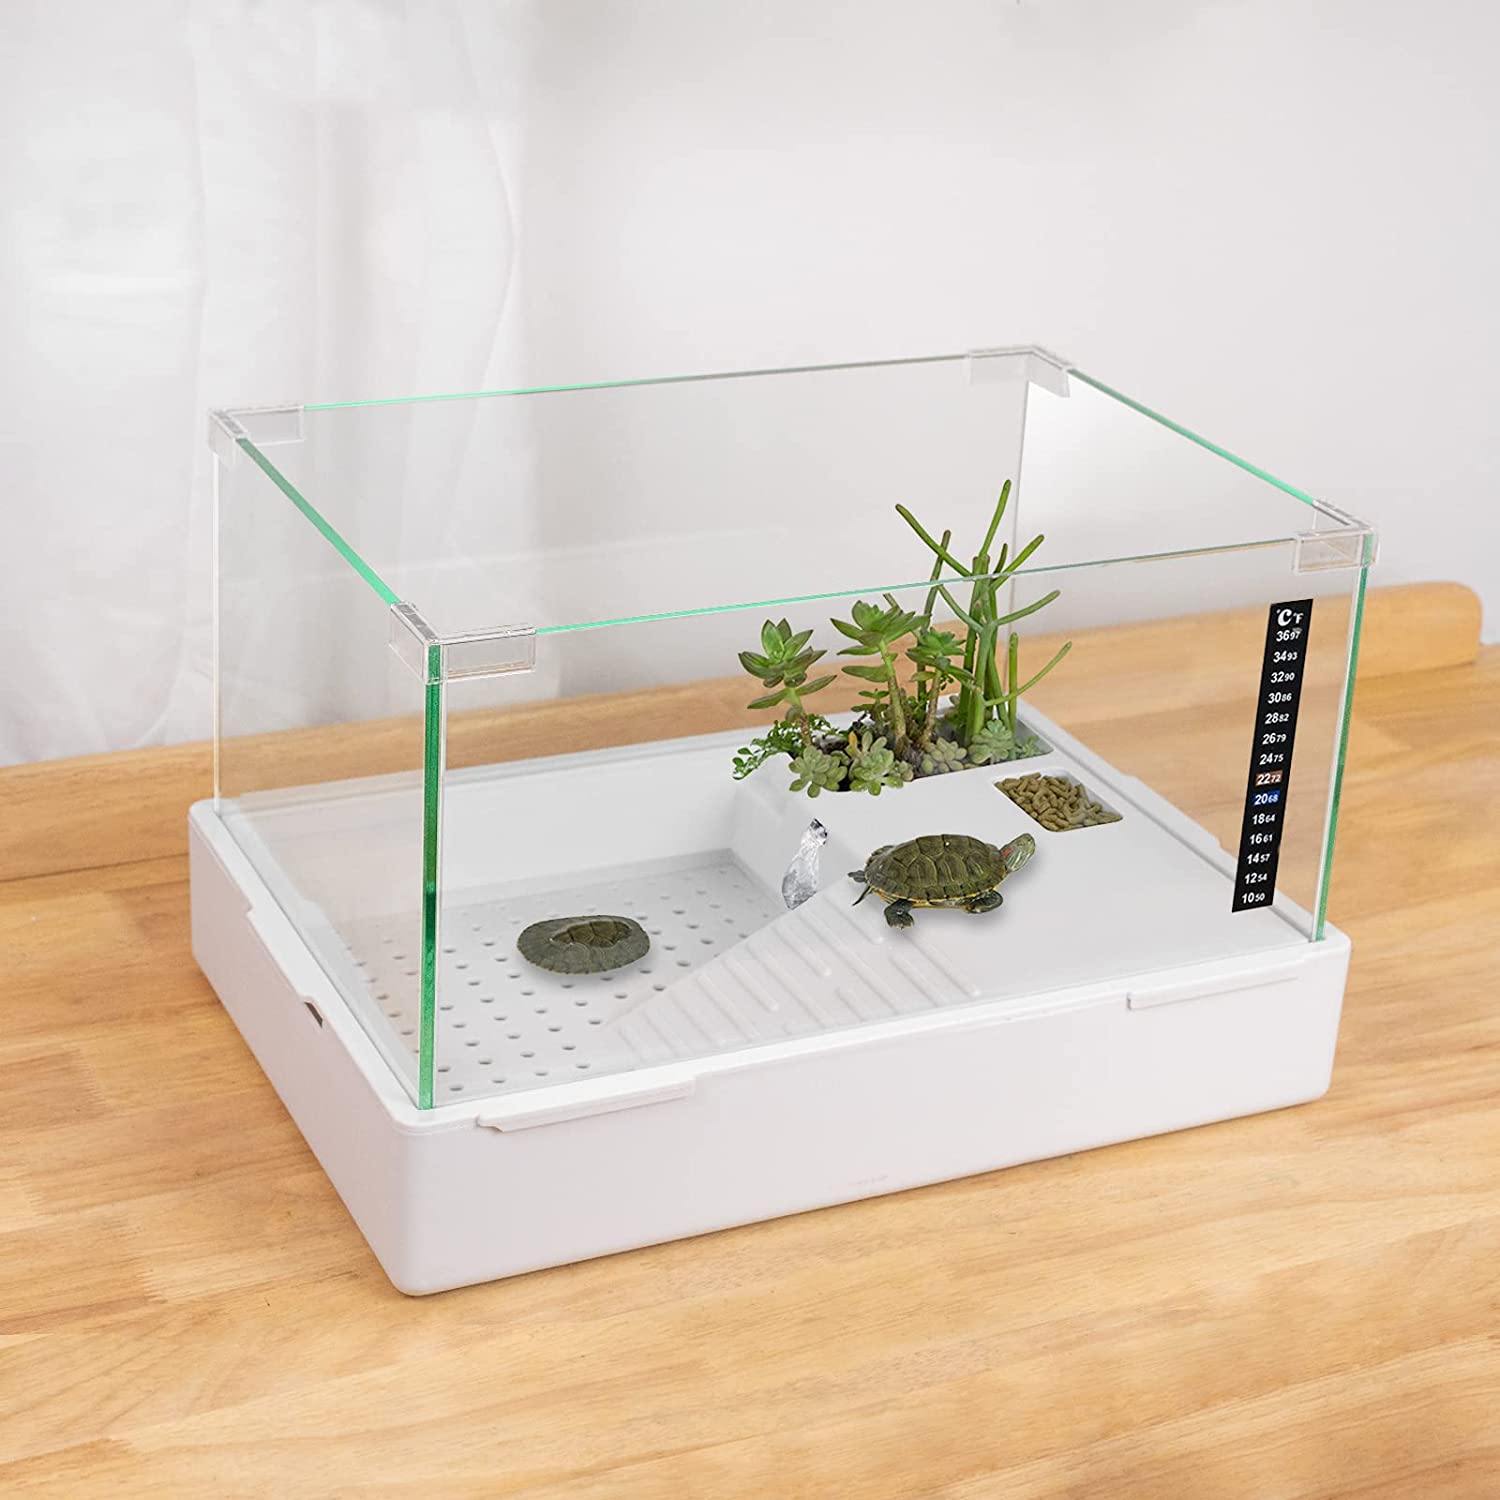 Binano Turtle Aquarium Turtle Tank kit Includes Accessories with Water  Filter